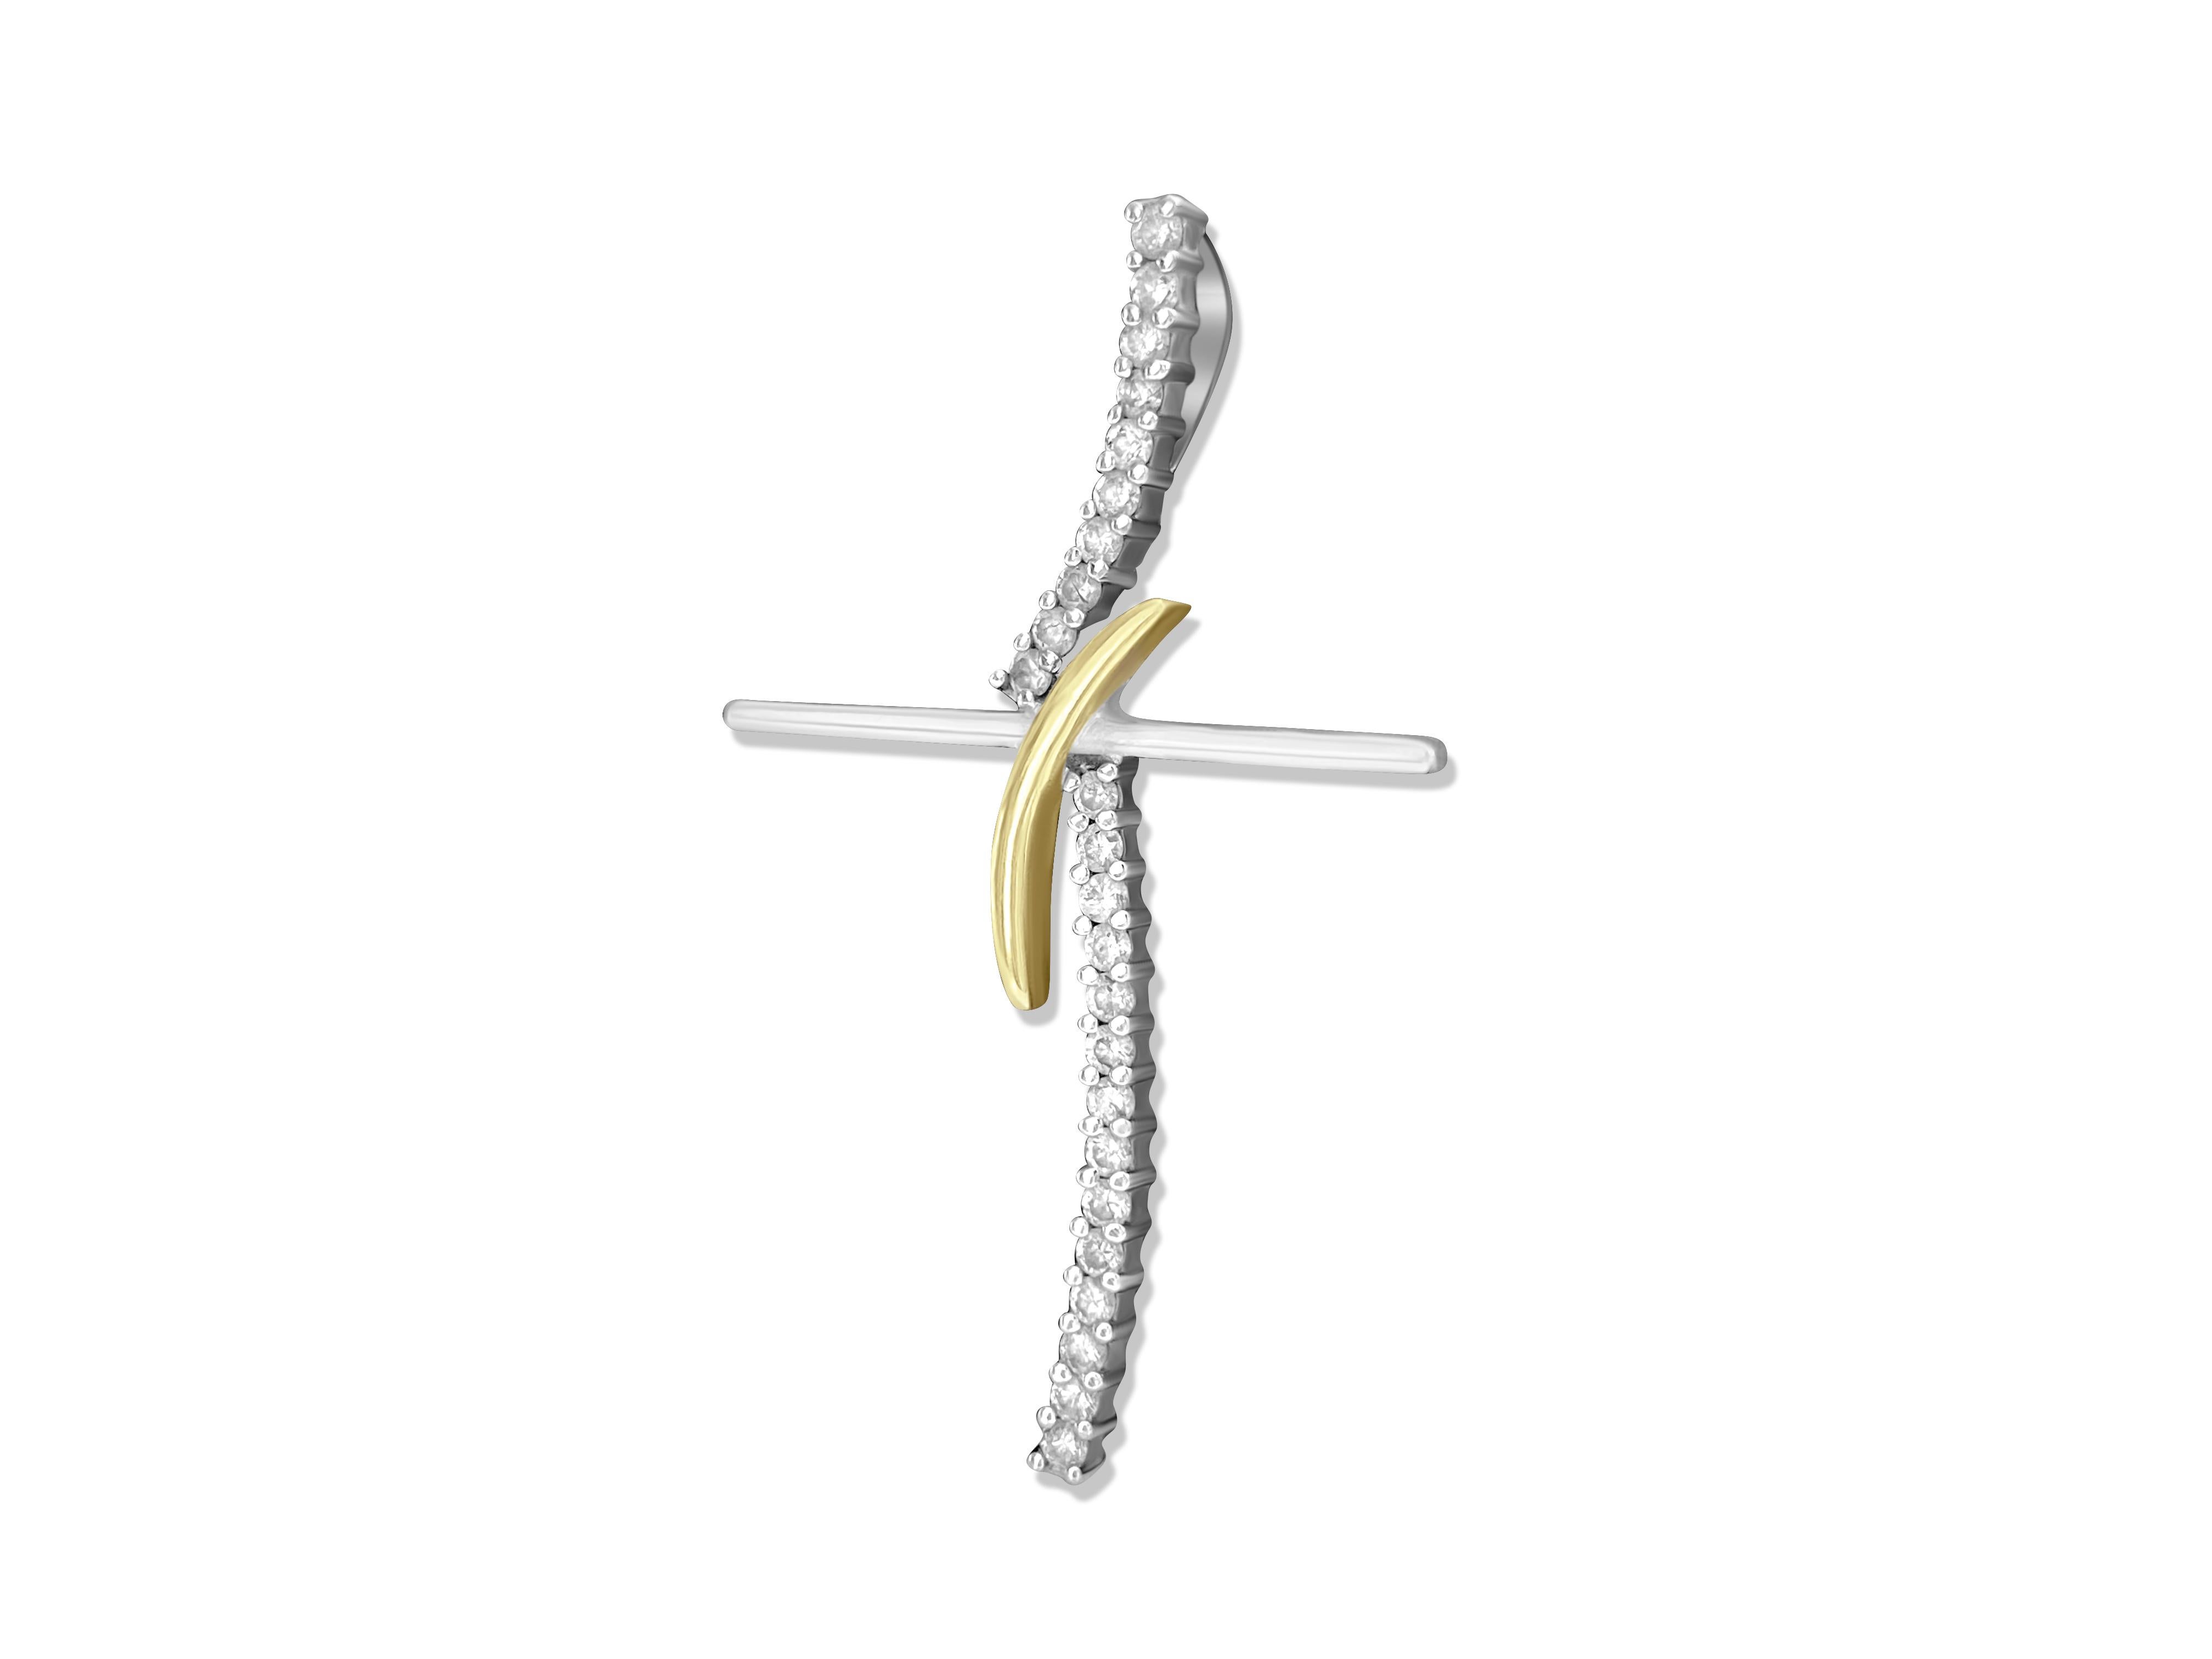 Experience divine elegance with our Two-Tone Diamond Cross, crafted from luxurious 18k white and yellow gold. Adorned with shimmering 0.80 carat diamonds boasting VS clarity and G color, this cross exudes brilliance and sophistication. With its